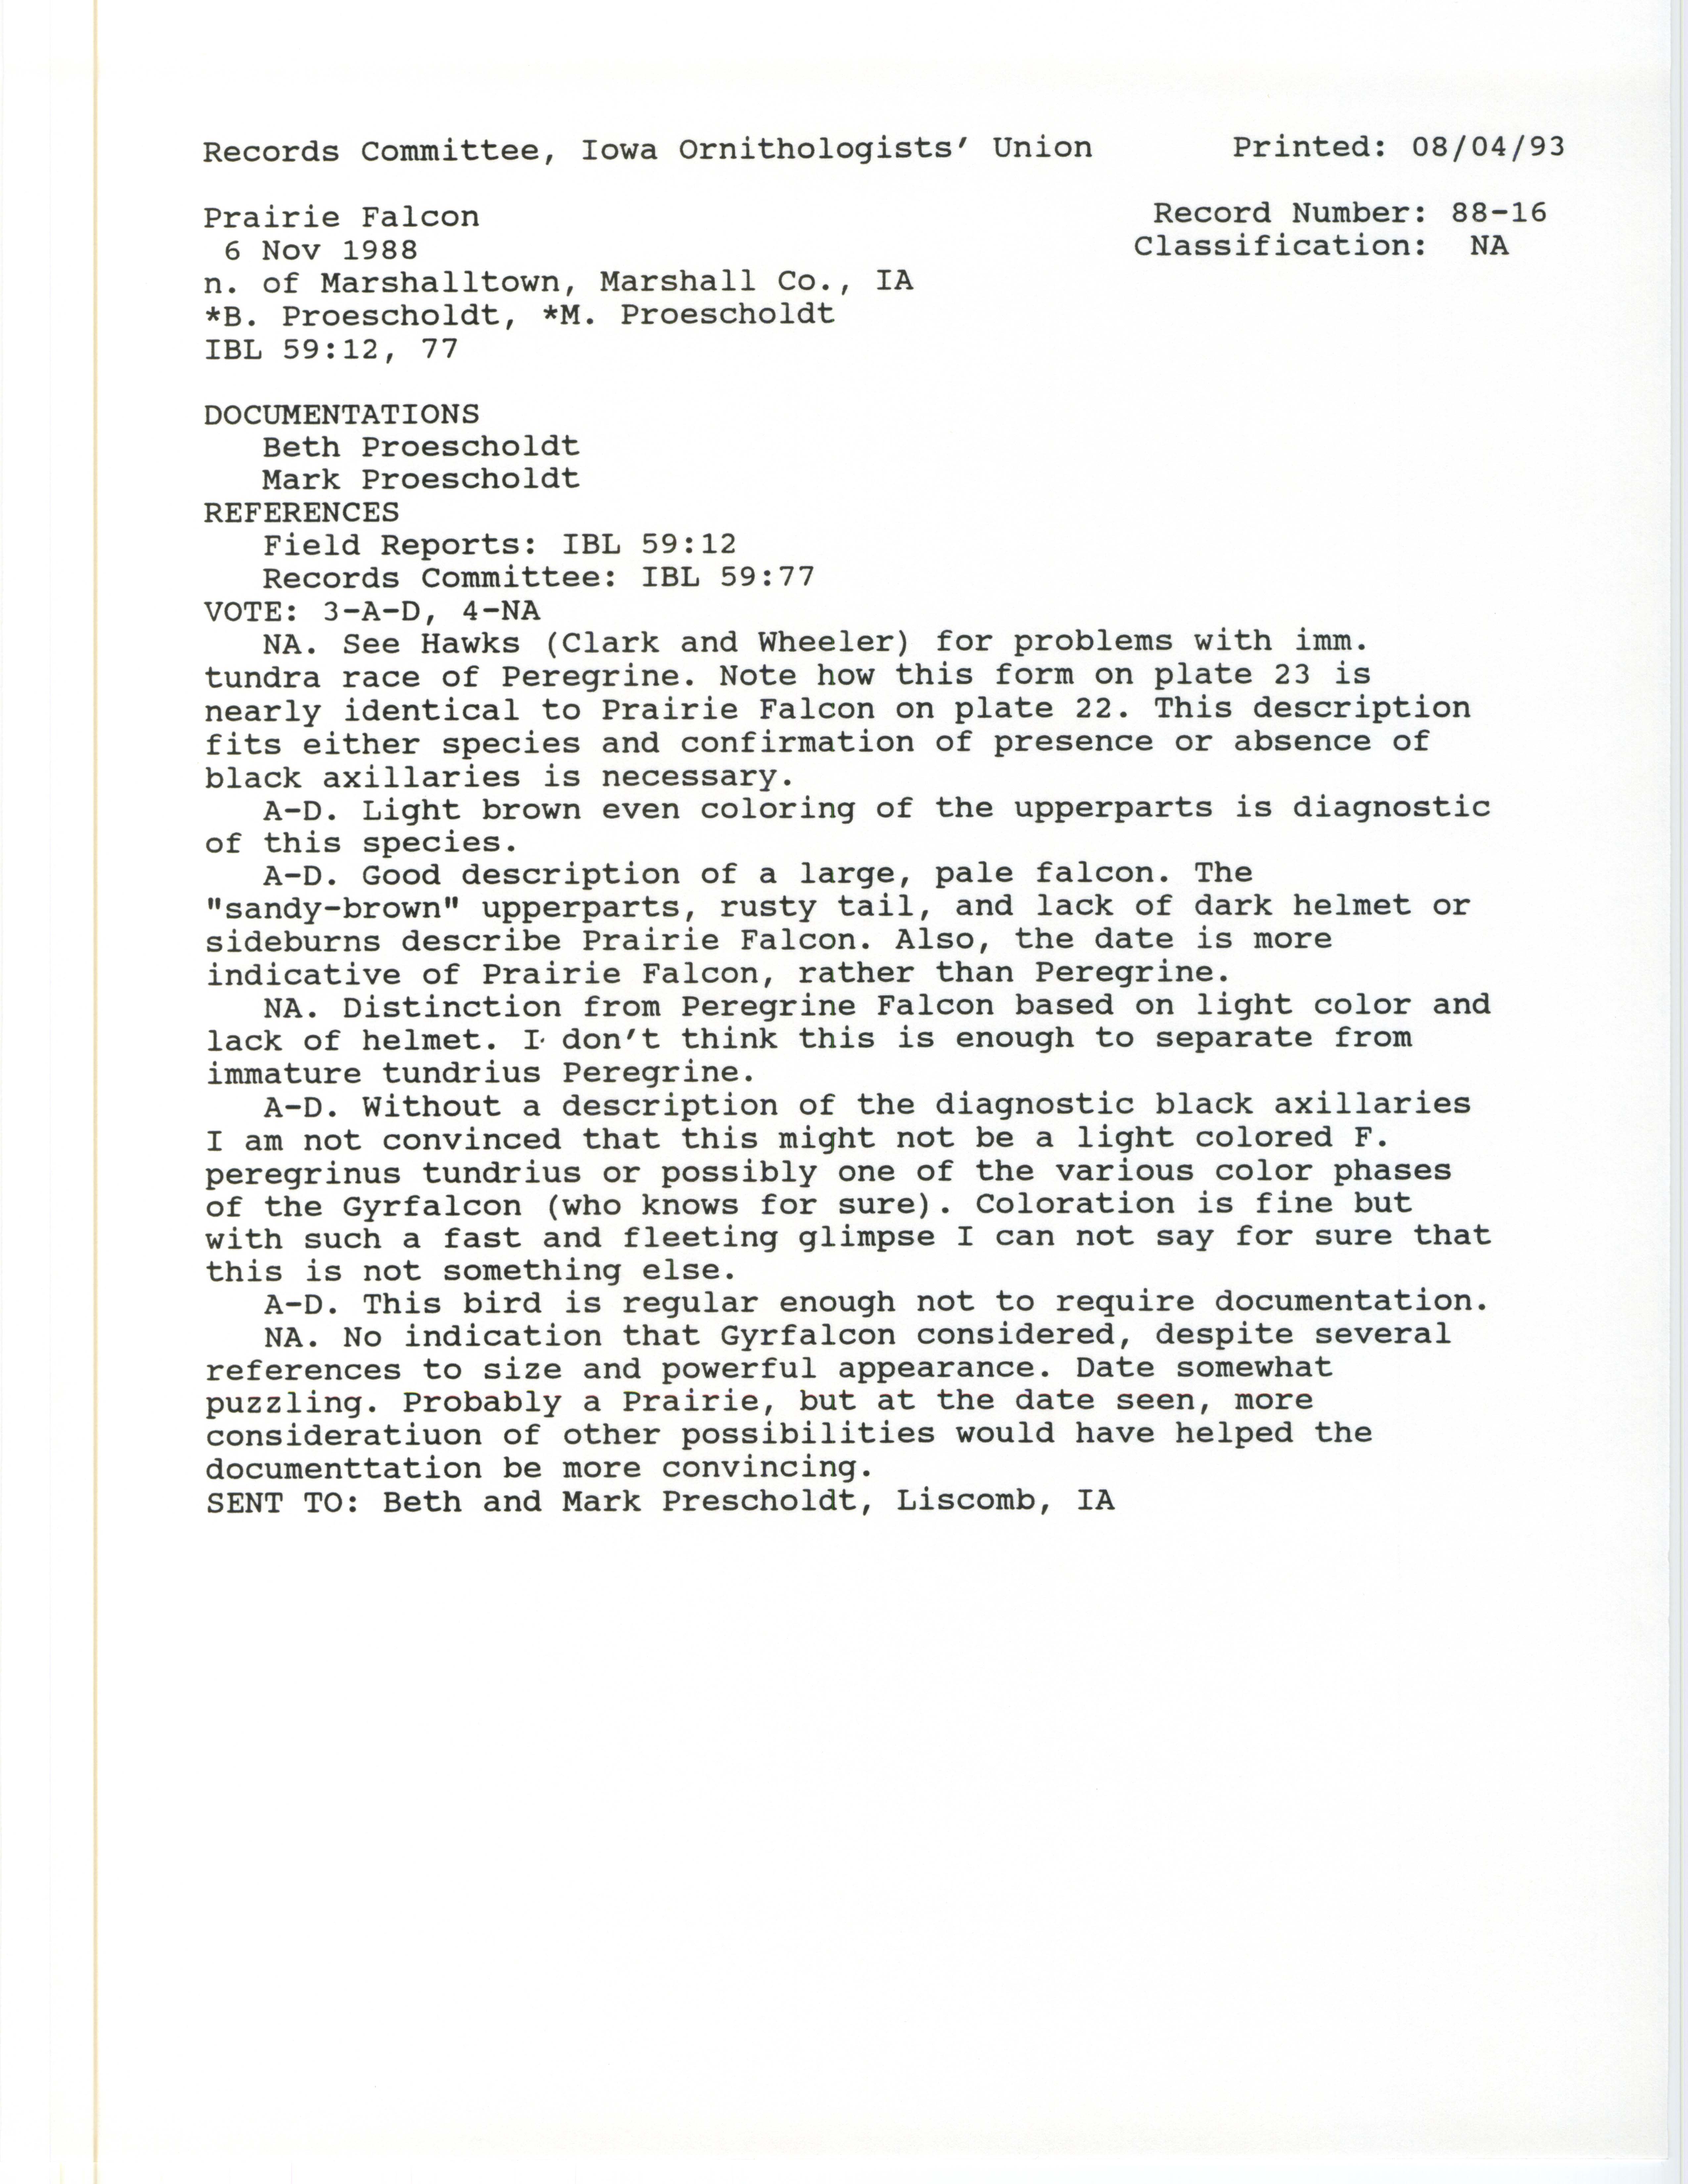 Records Committee review for rare bird sighting of Prairie Falcon north of Marshalltown, 1988